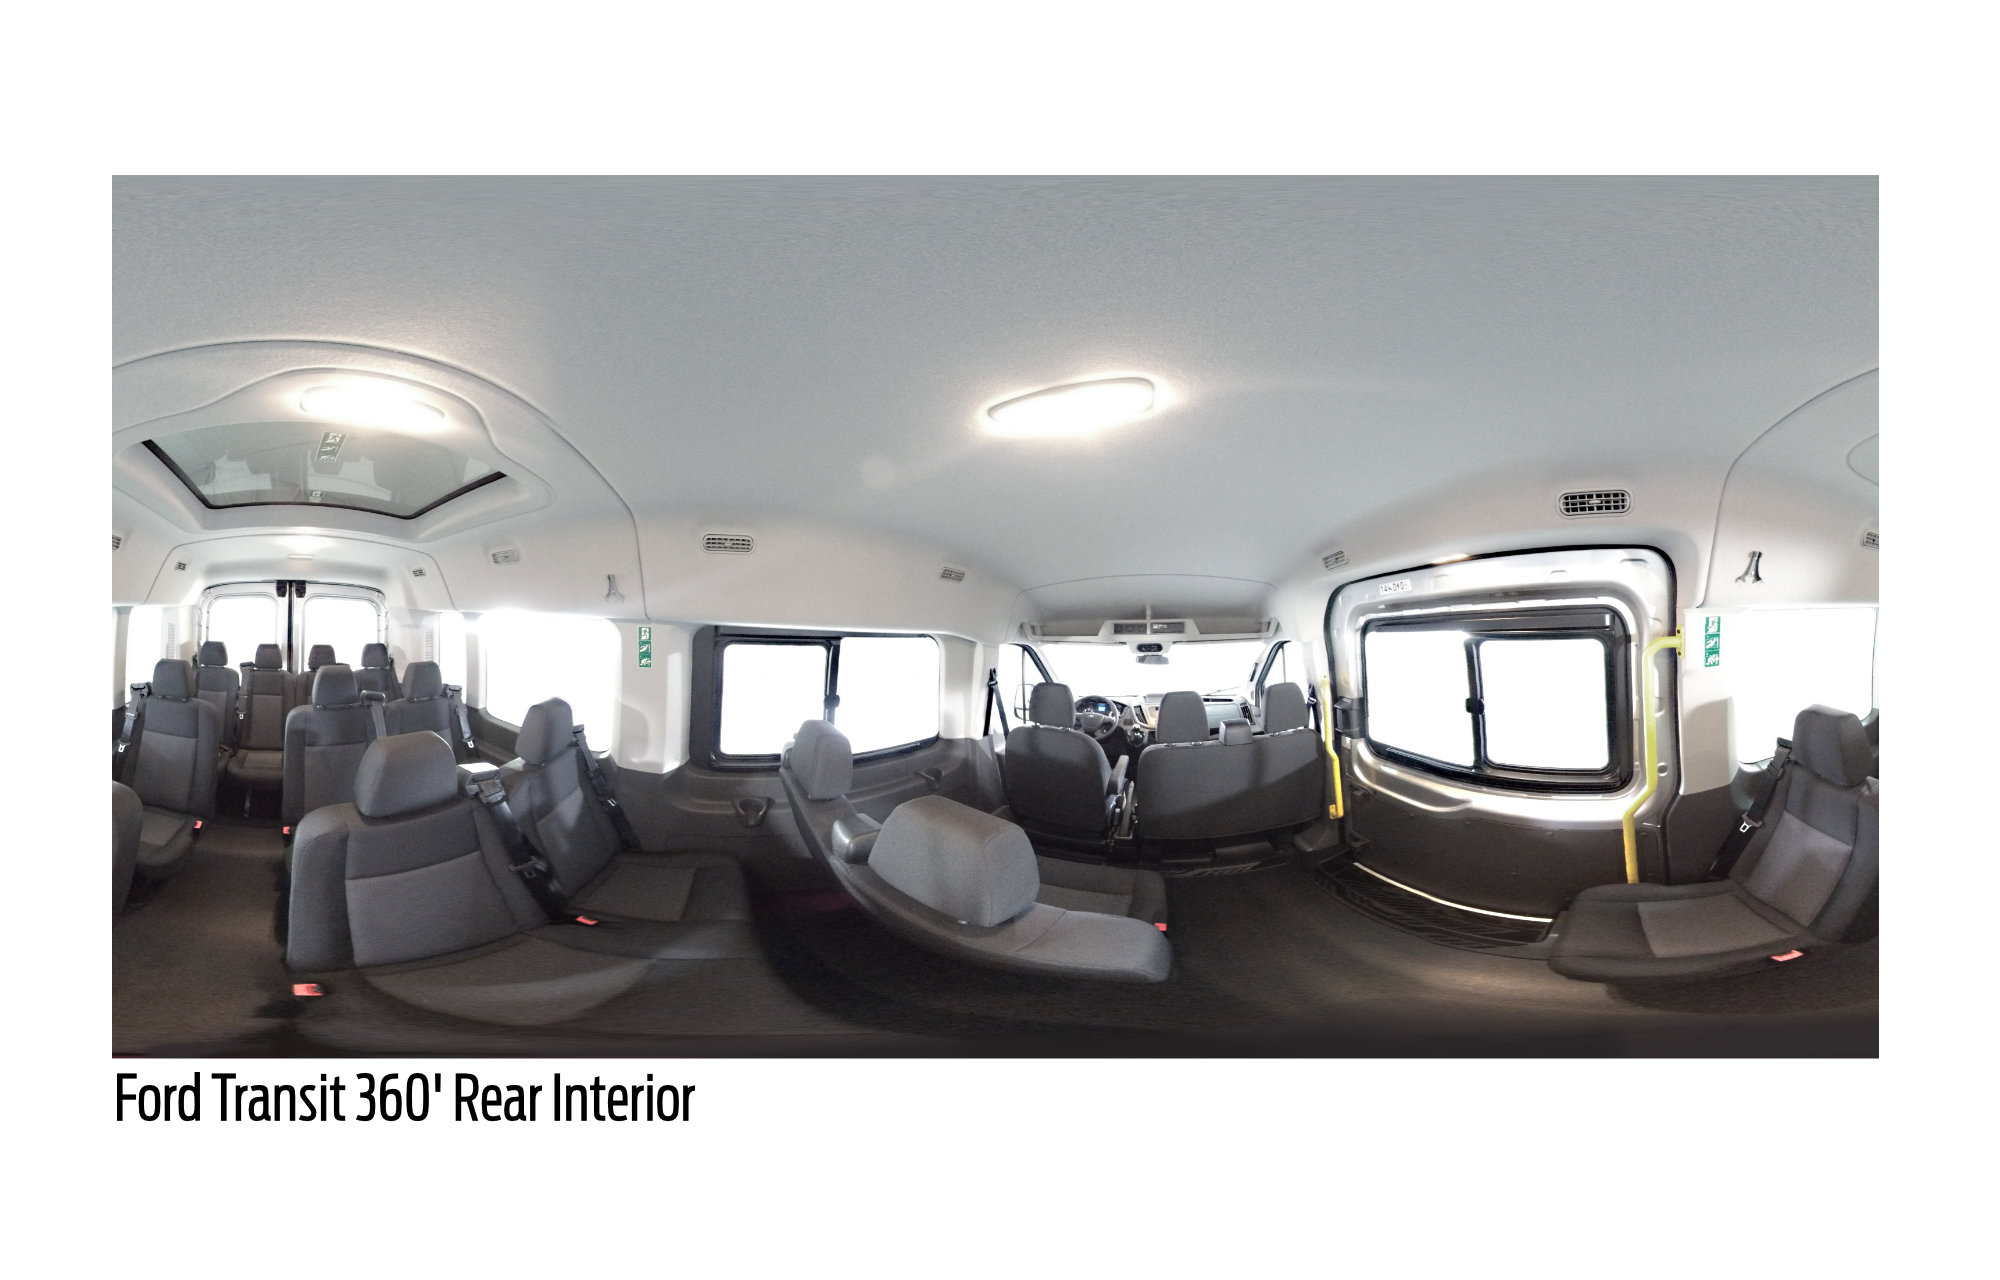 The Ford Transit spacious interior with enough room for 15 passengers.